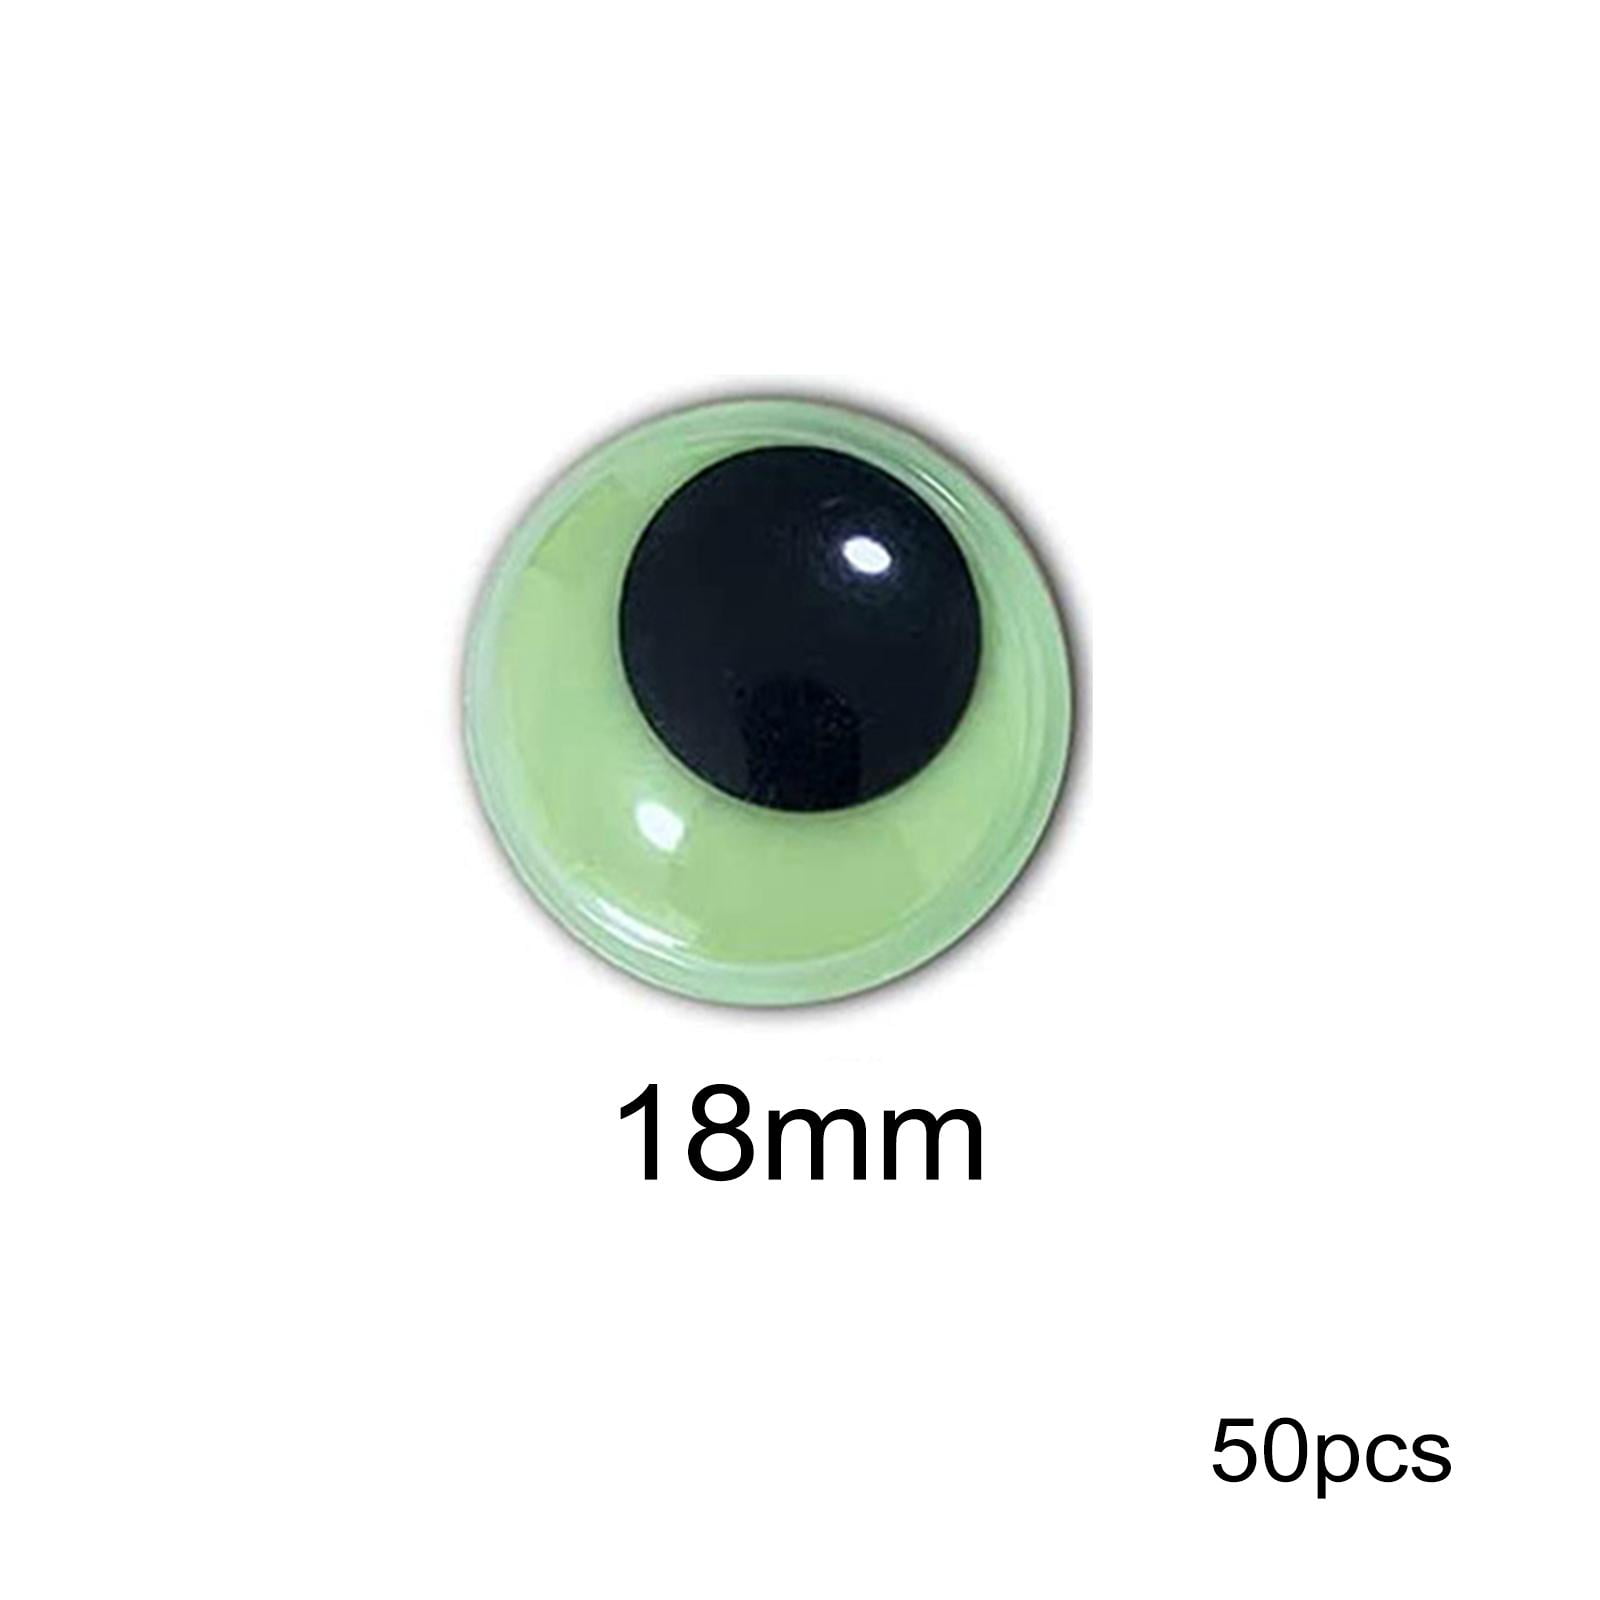  UPINS 300Pcs Glow in The Dark Googly Wiggle Eyes Self Adhesive  Luminous Google Eyes for Crafts Sticker 12mm Sparkle Colored Google Eyes  Suitable for Handicrafts DIY Halloween Christmas : Arts, Crafts